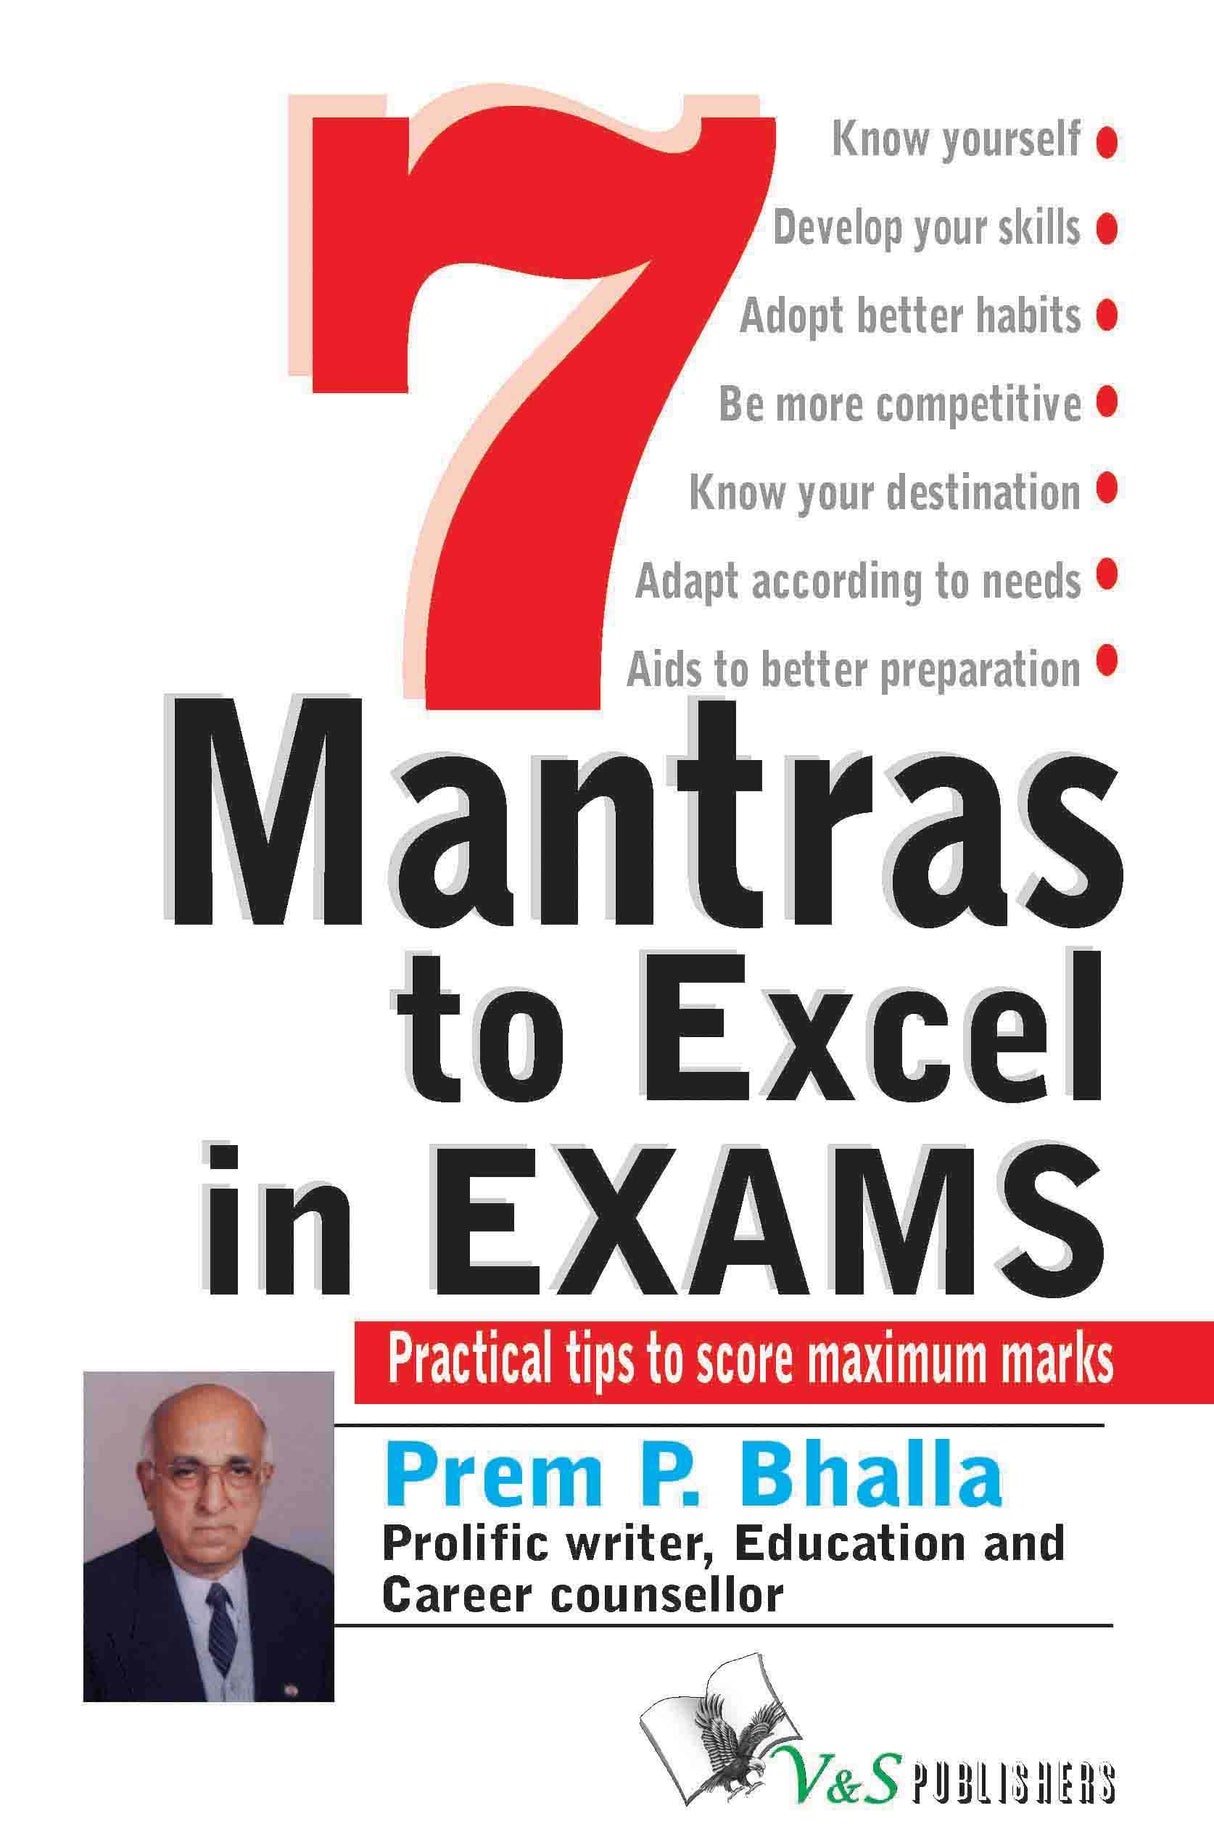 7 Mantras To Excel In Exams: Practical tips to score maximum marks